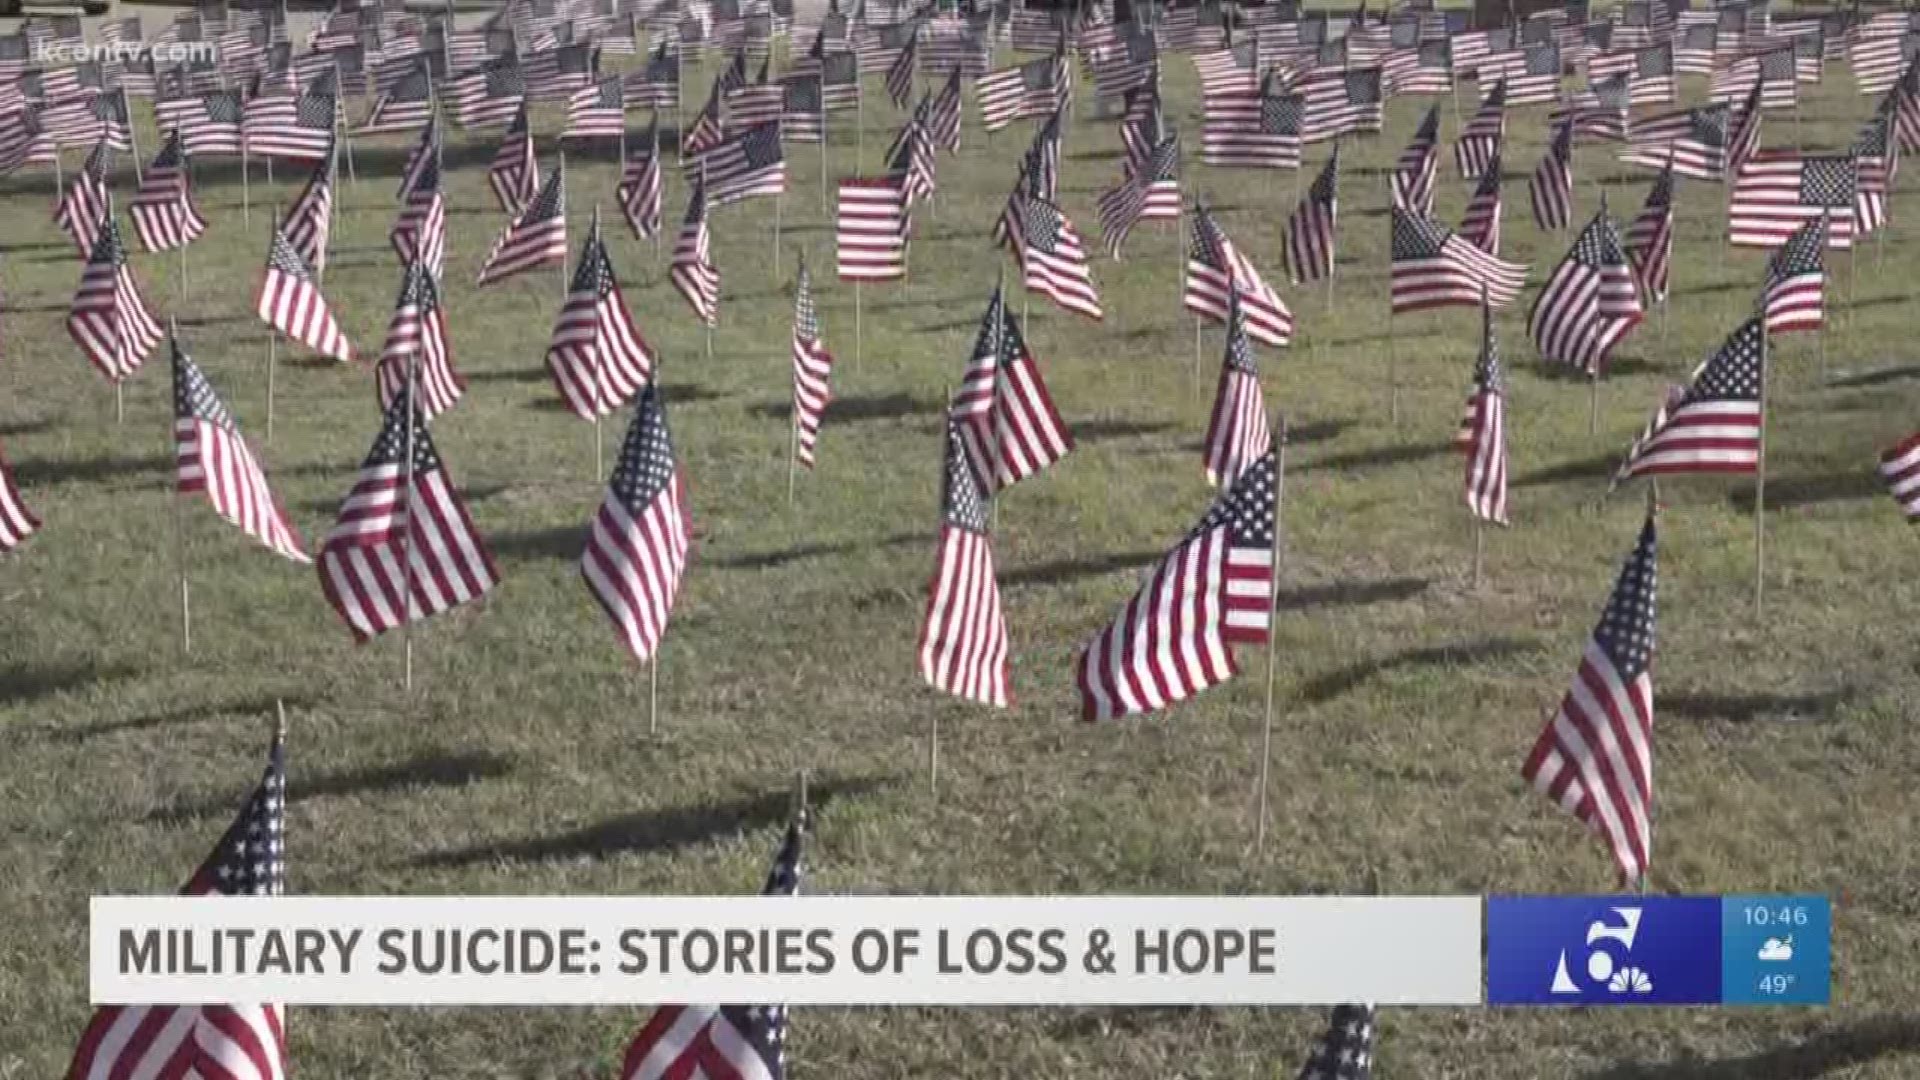 Leslie Draffin sat down with six families affected by military suicide who hope their stories of loss will encourage others struggling with mental health to seek help.